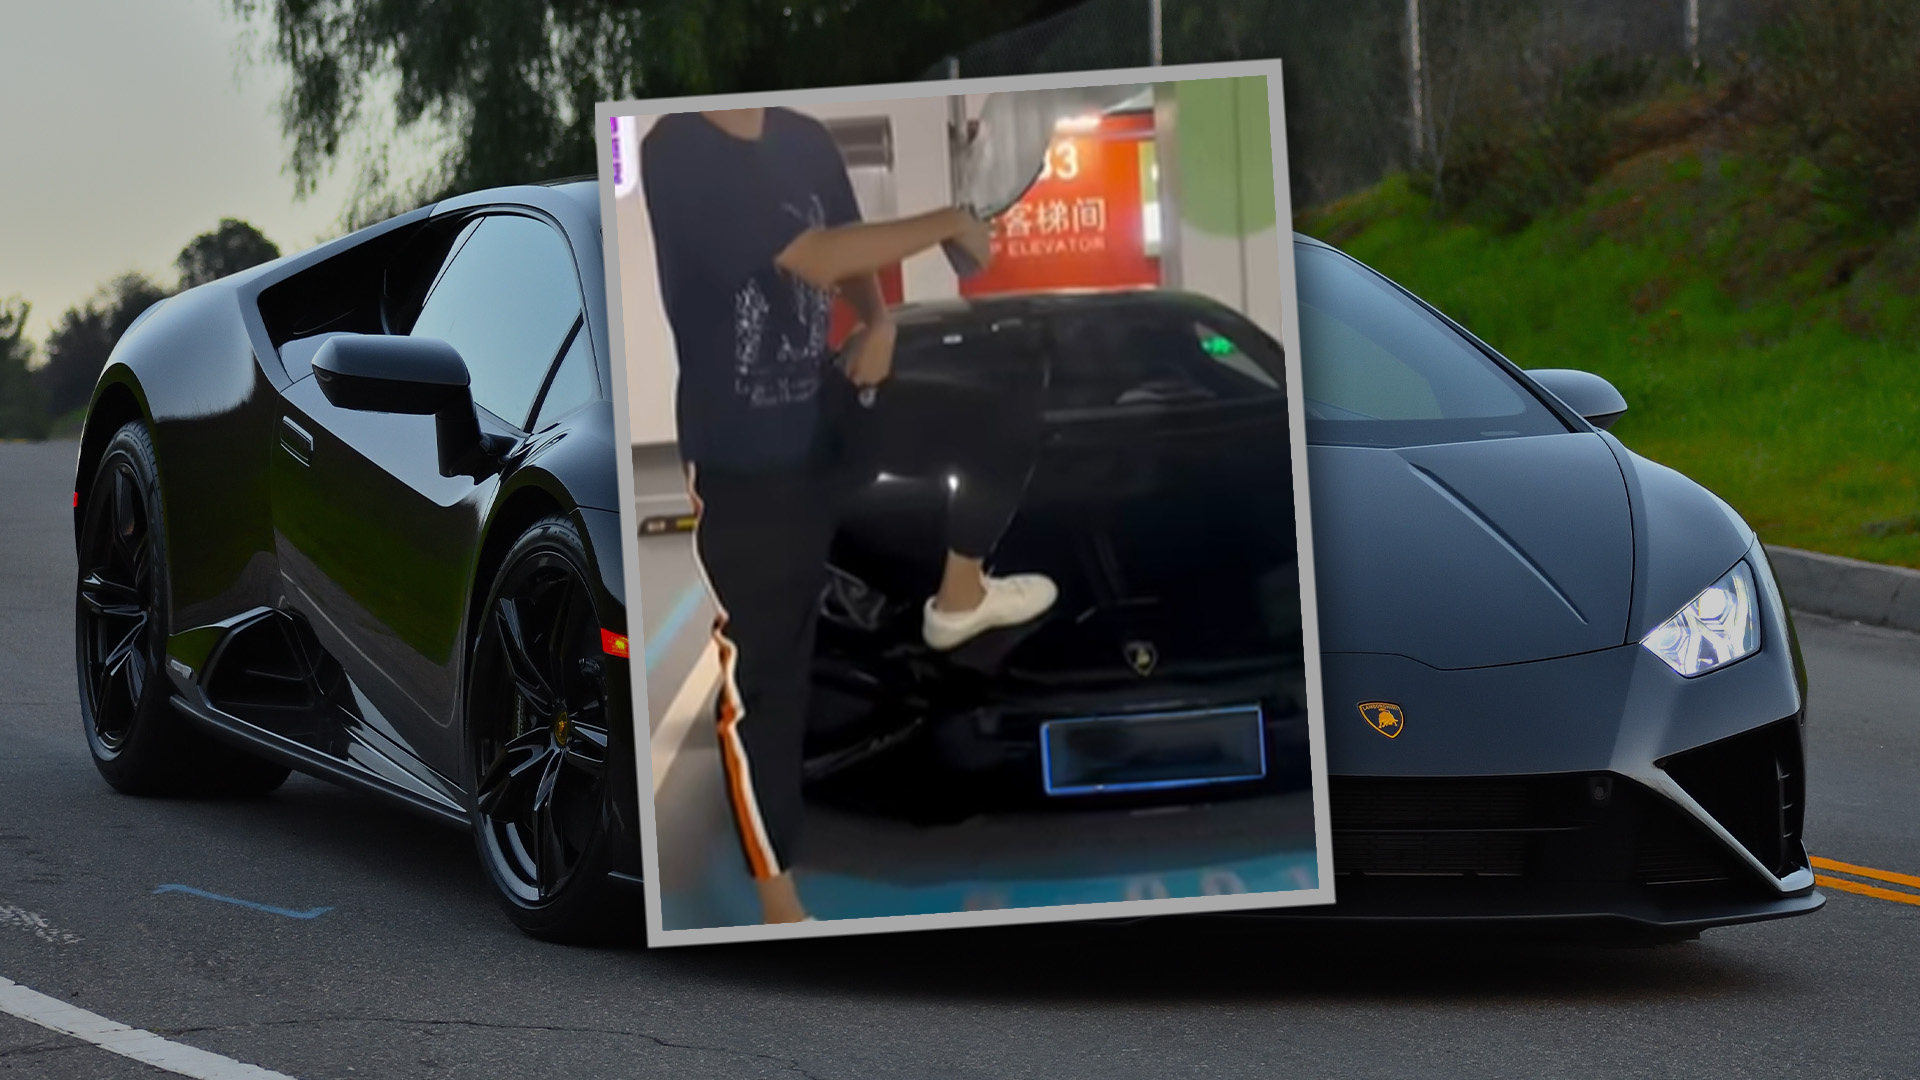 A 15-year-old boy in China who caused US$25,000 worth of damage to a Lamborghini sports car has refused to pay to have it fixed because he is “a minor” triggering widespread anger on mainland social media. Photo: SCMP composite/Shutterstock/Douyin